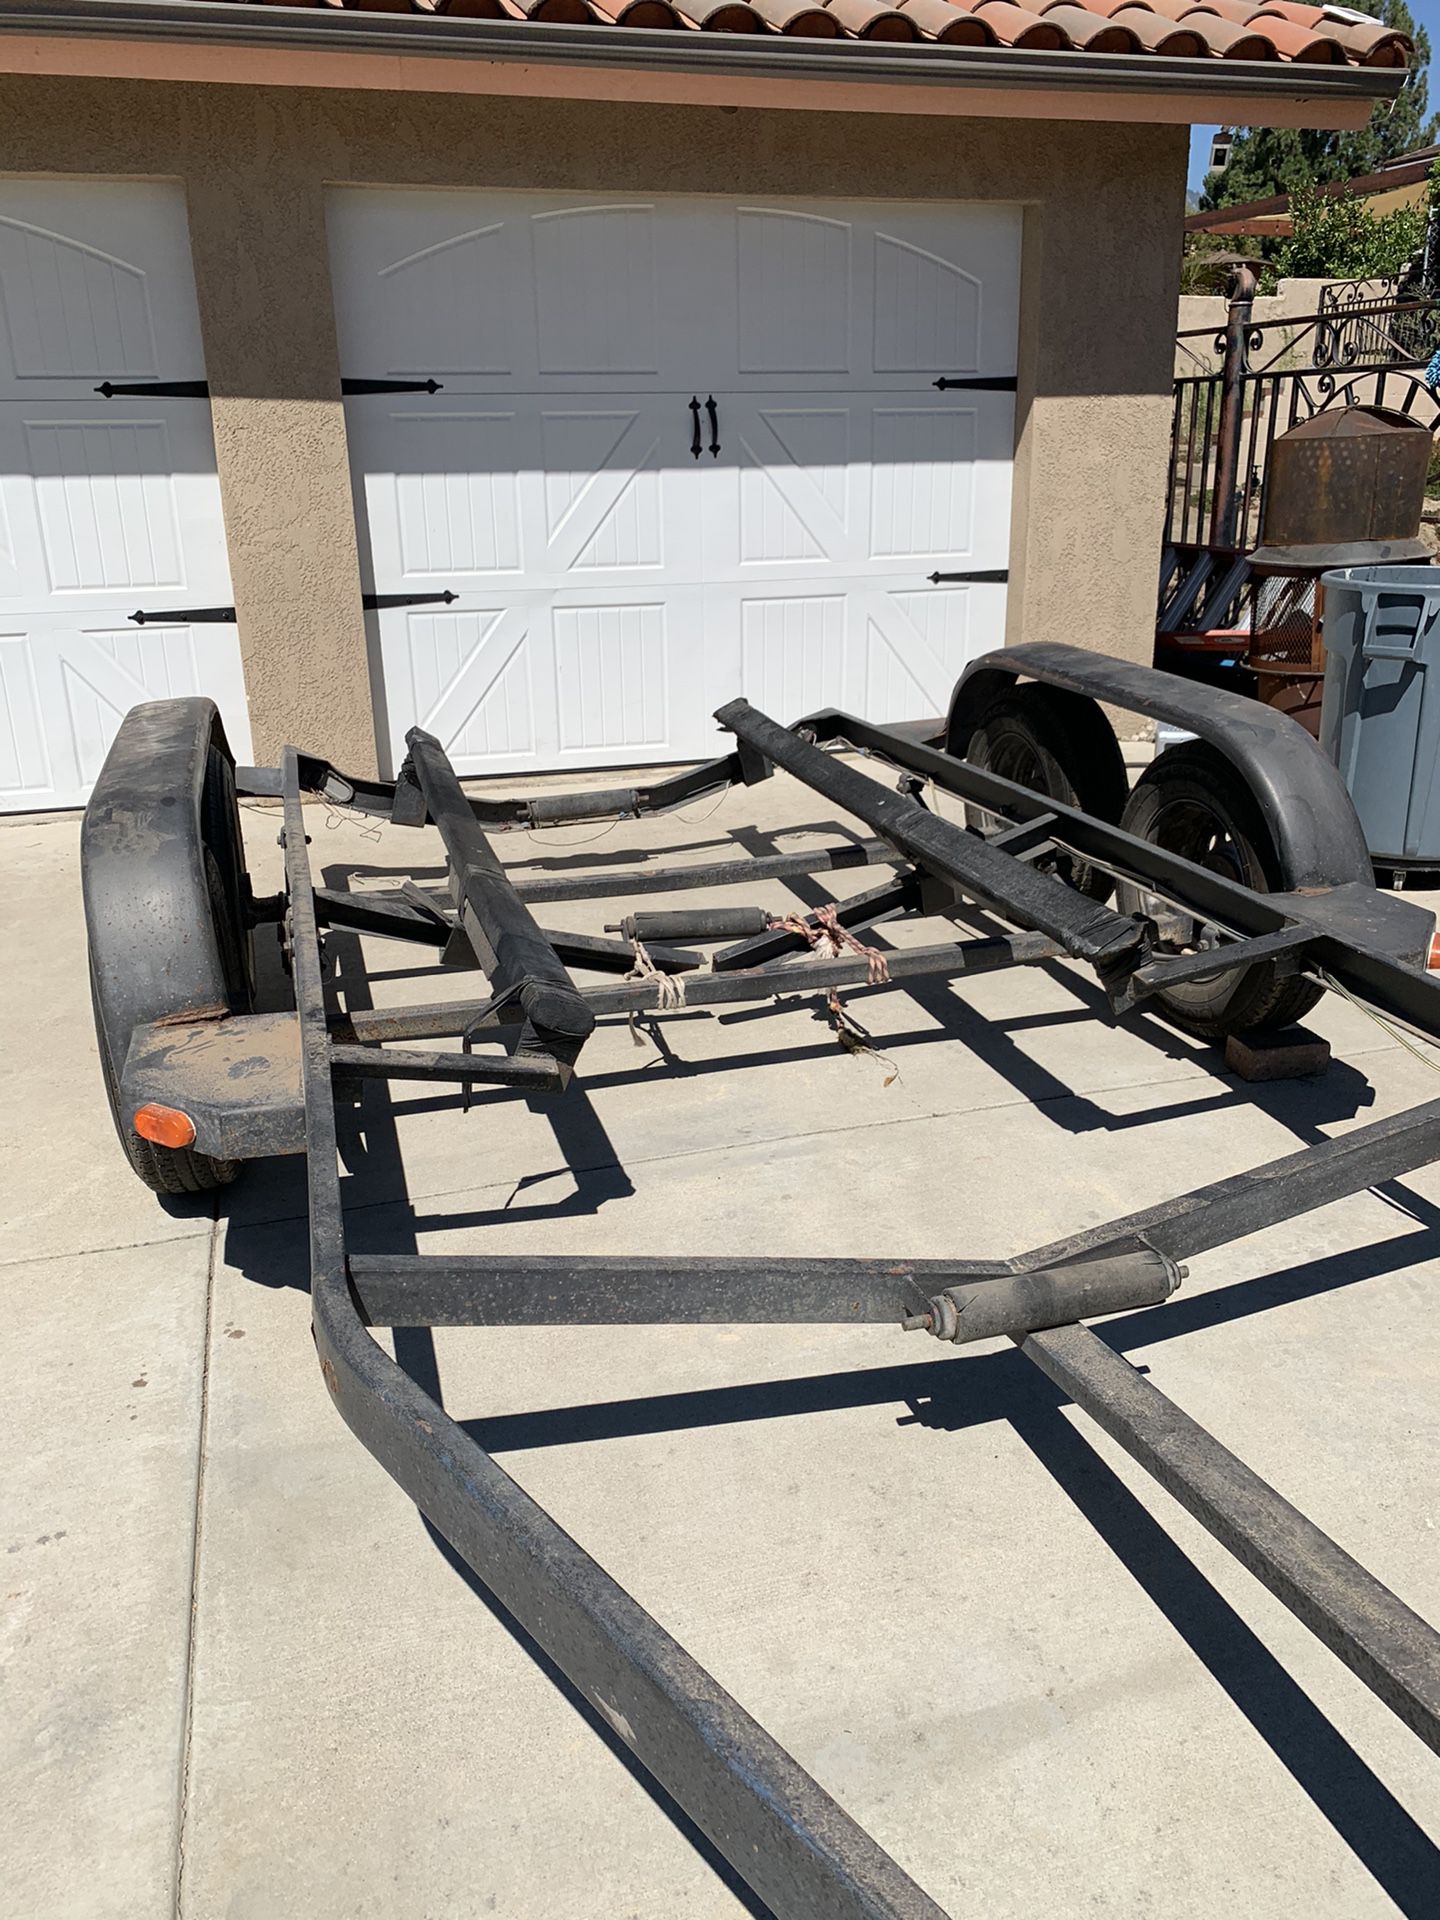 Boat trailer for almost free